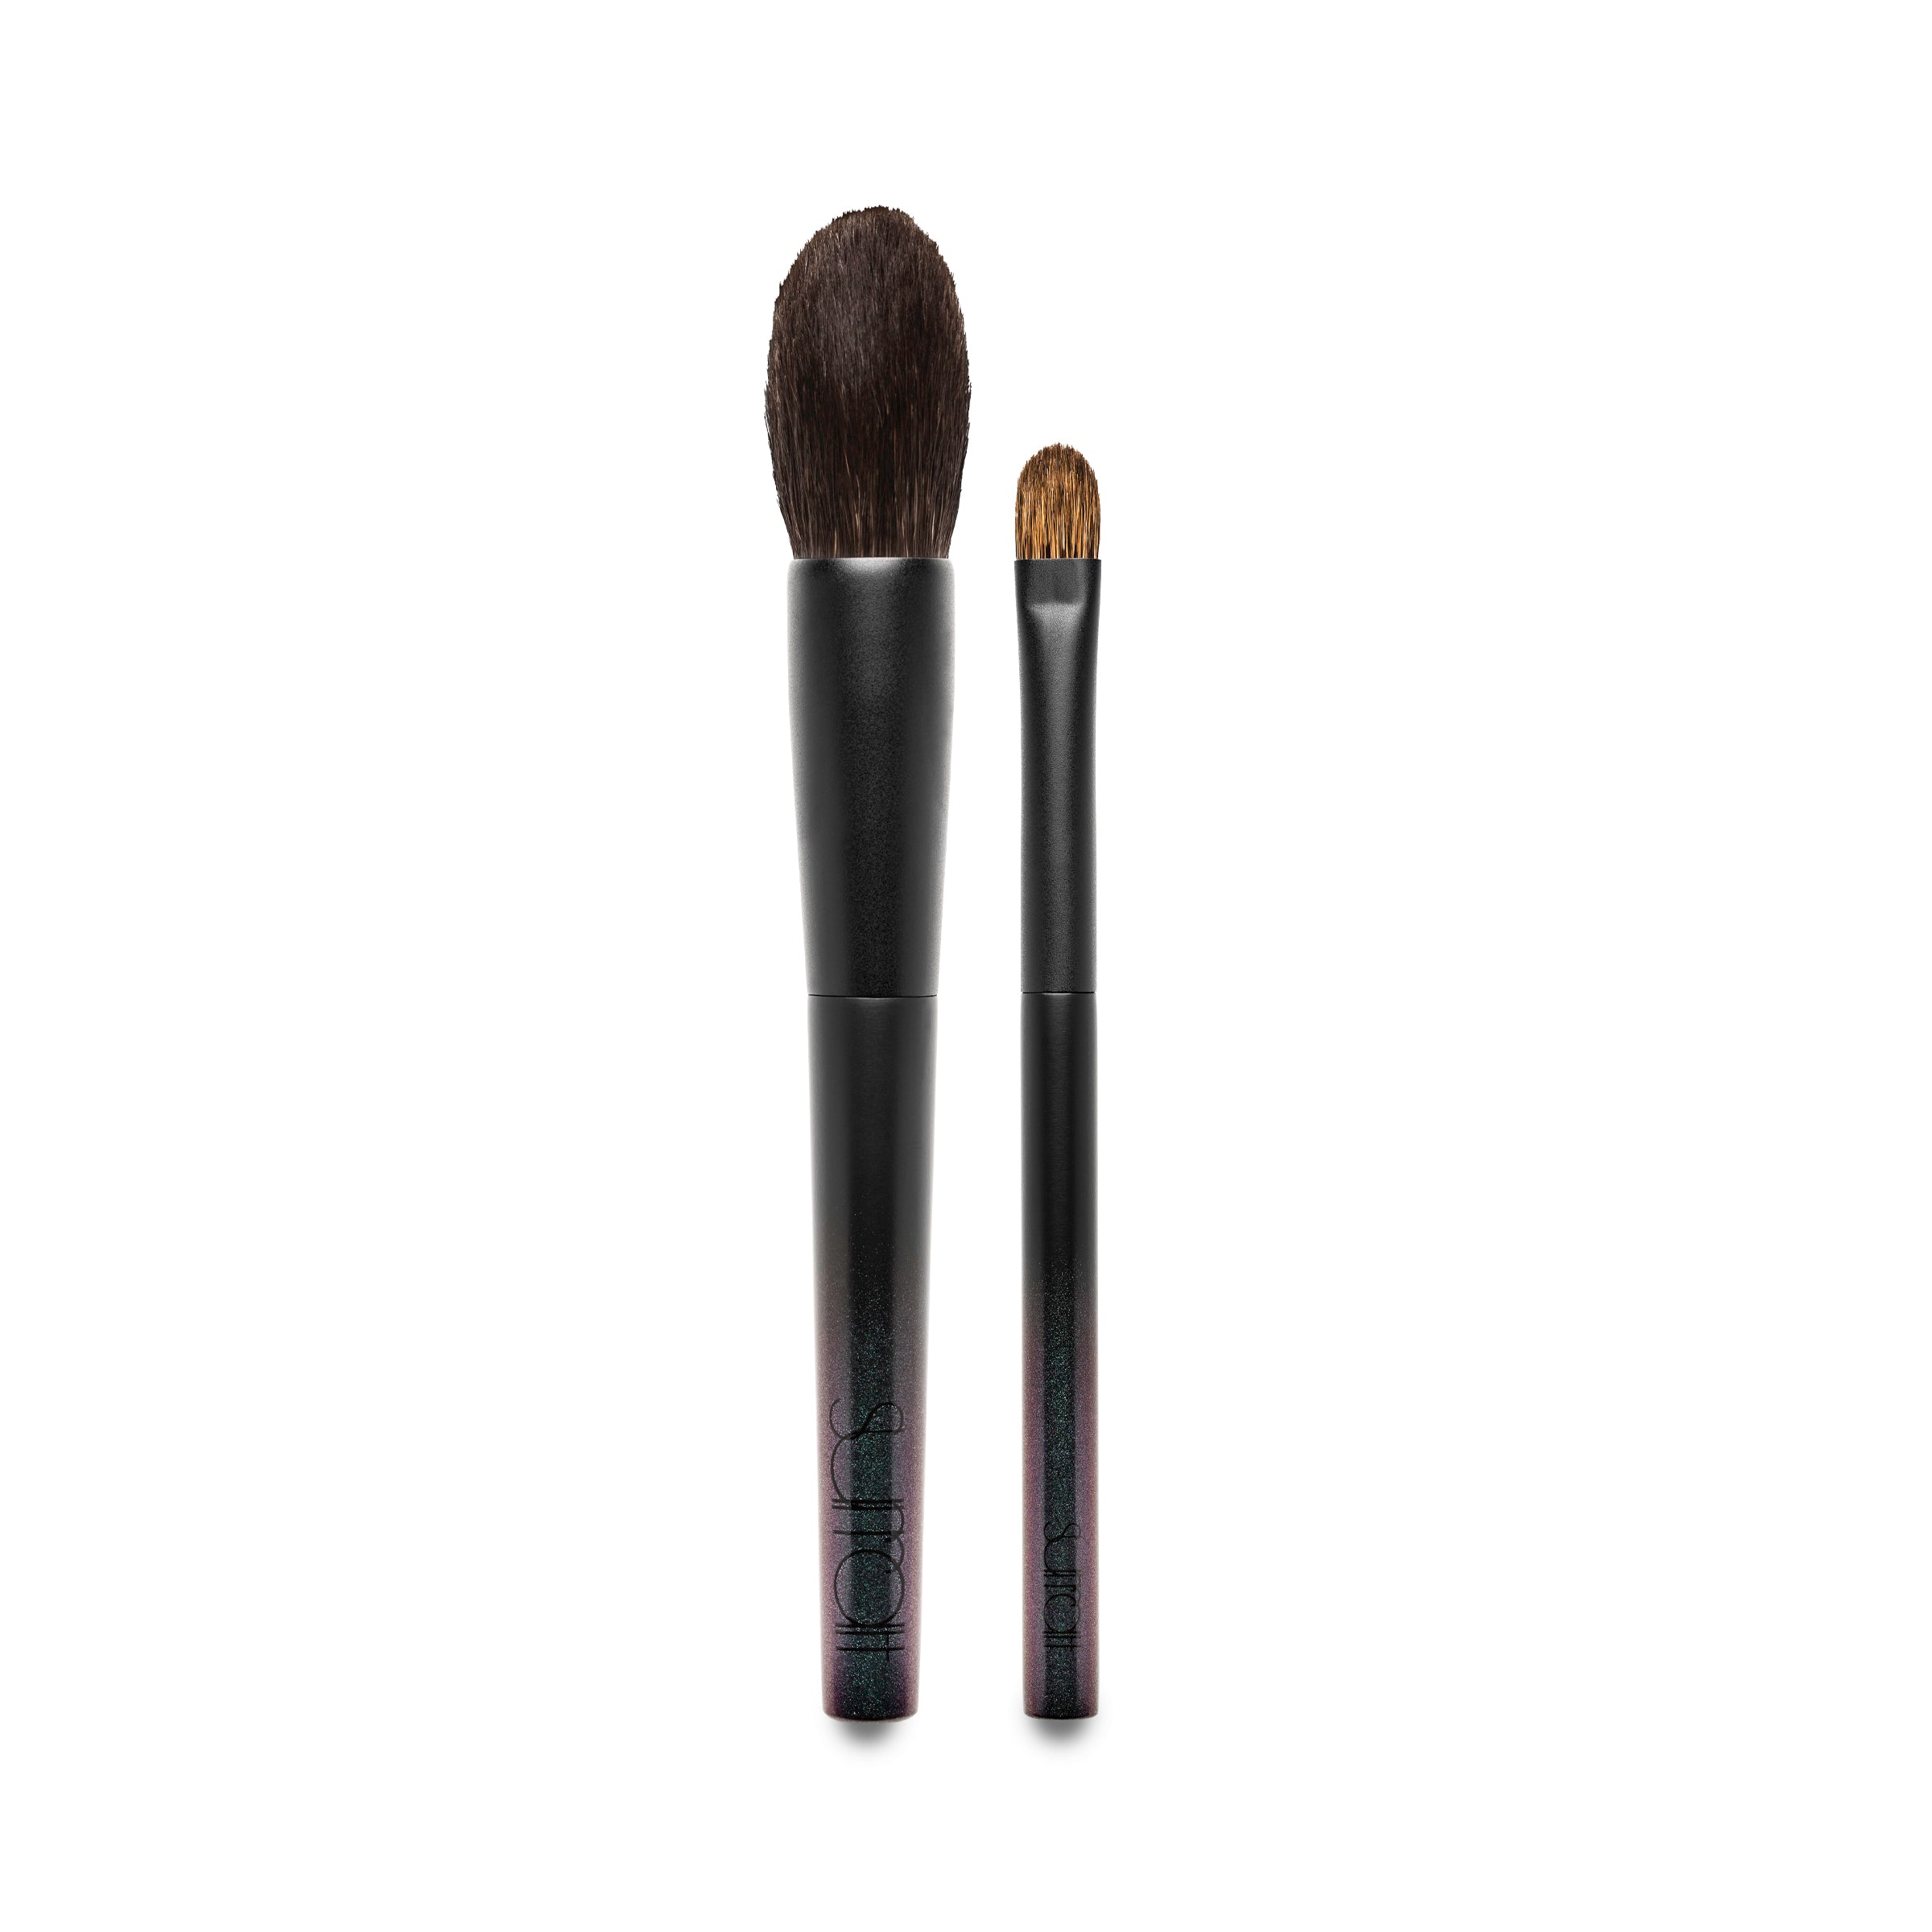 Artistique Eye and Face Brush Duo - Two essential, multitasking brushes—one for eyes, one for face